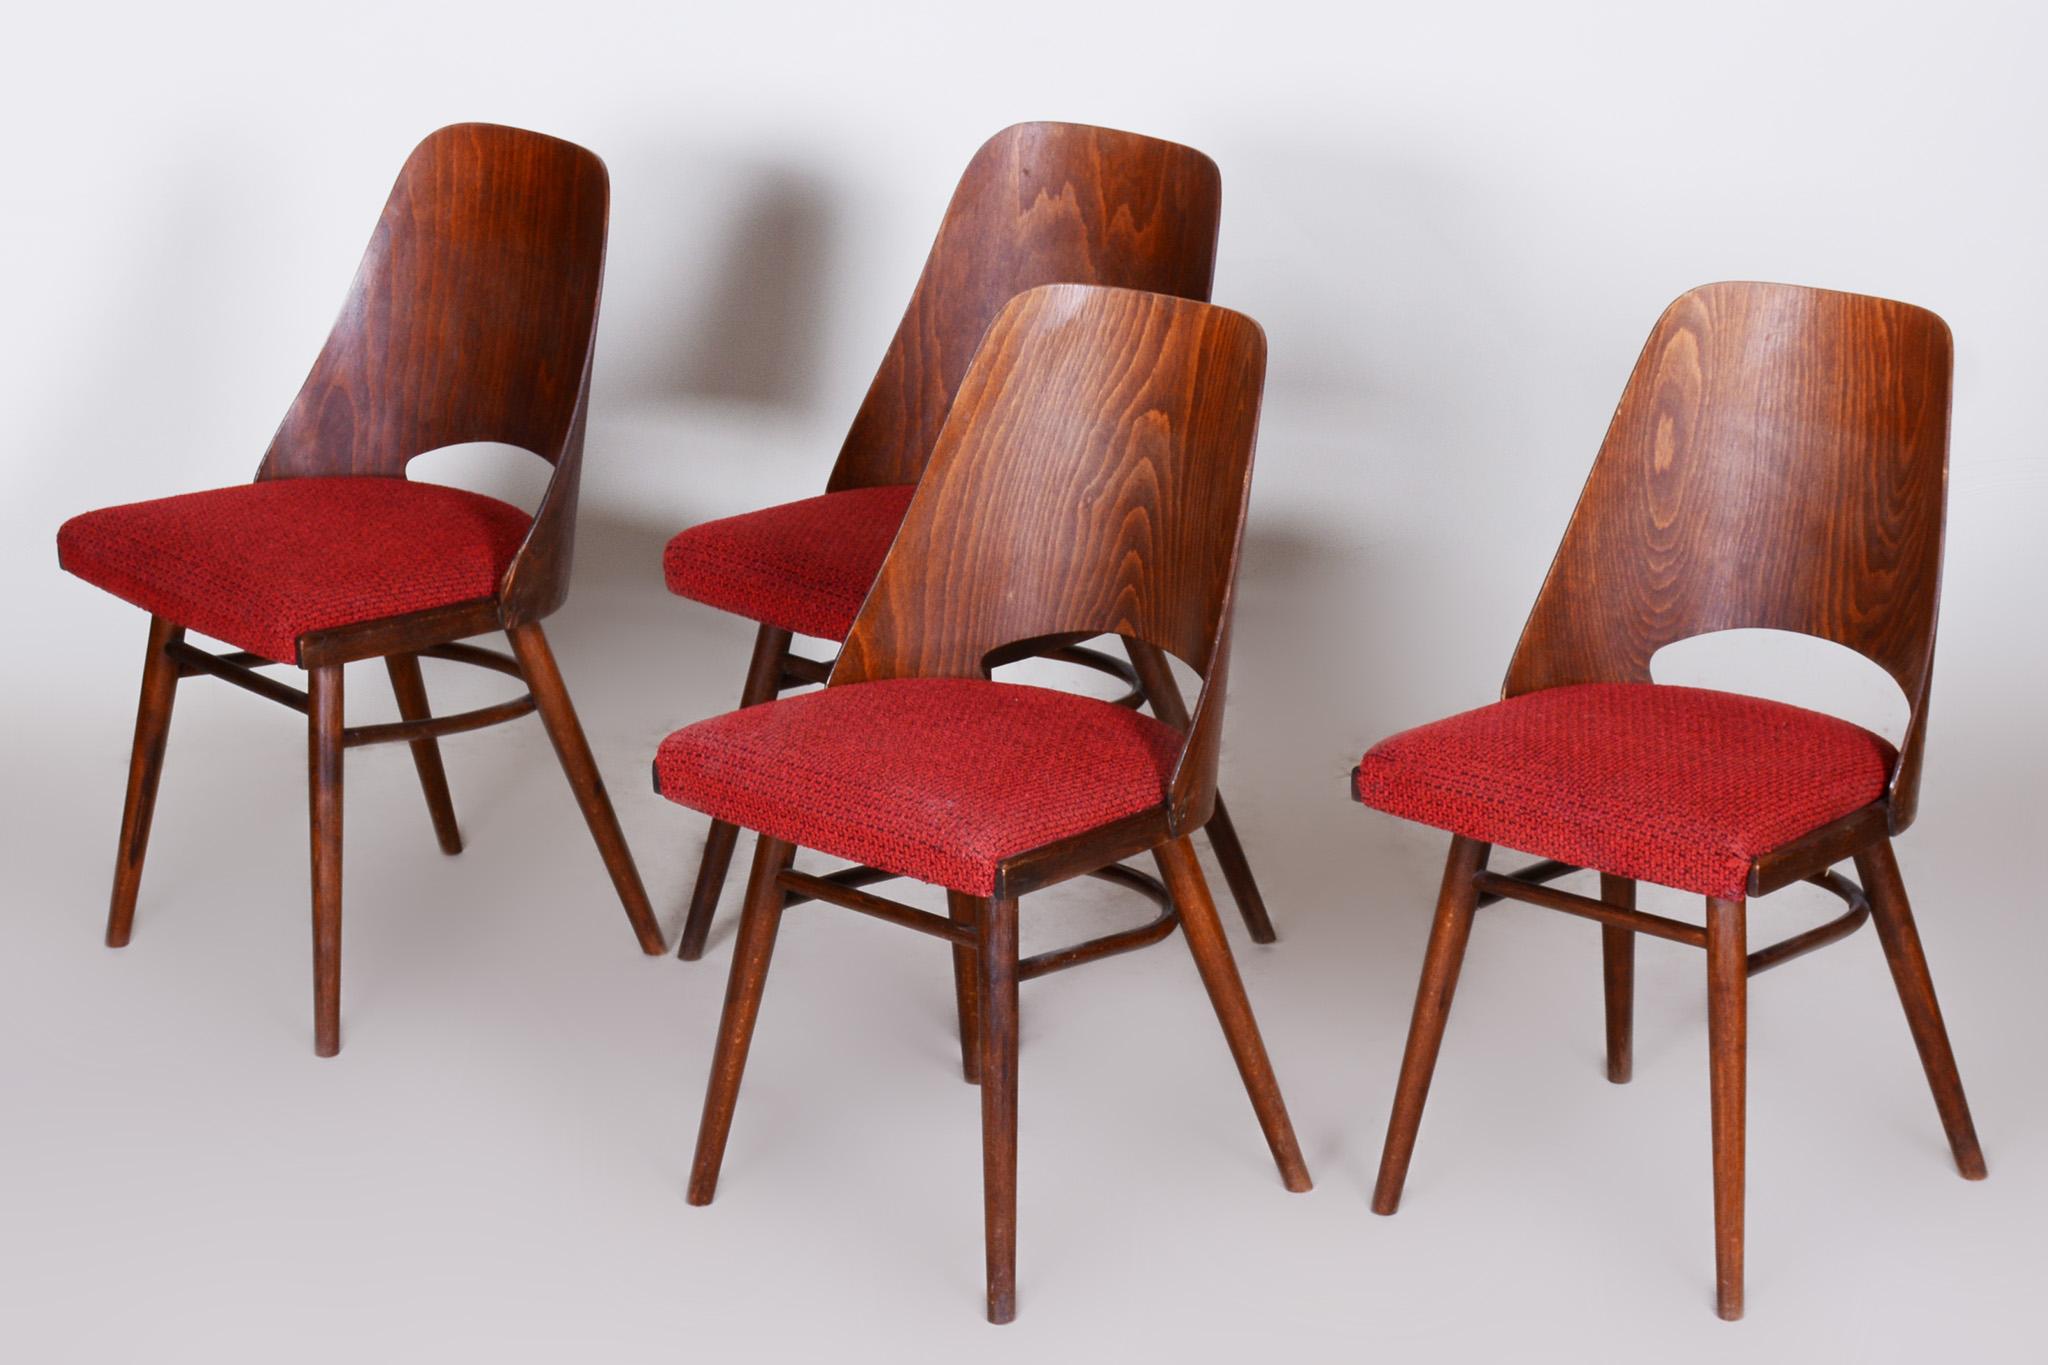 20th Century Well Preserved Czech Brown and Red Beech Chairs by Oswald Haerdtl, 4 Pcs, 1950s For Sale